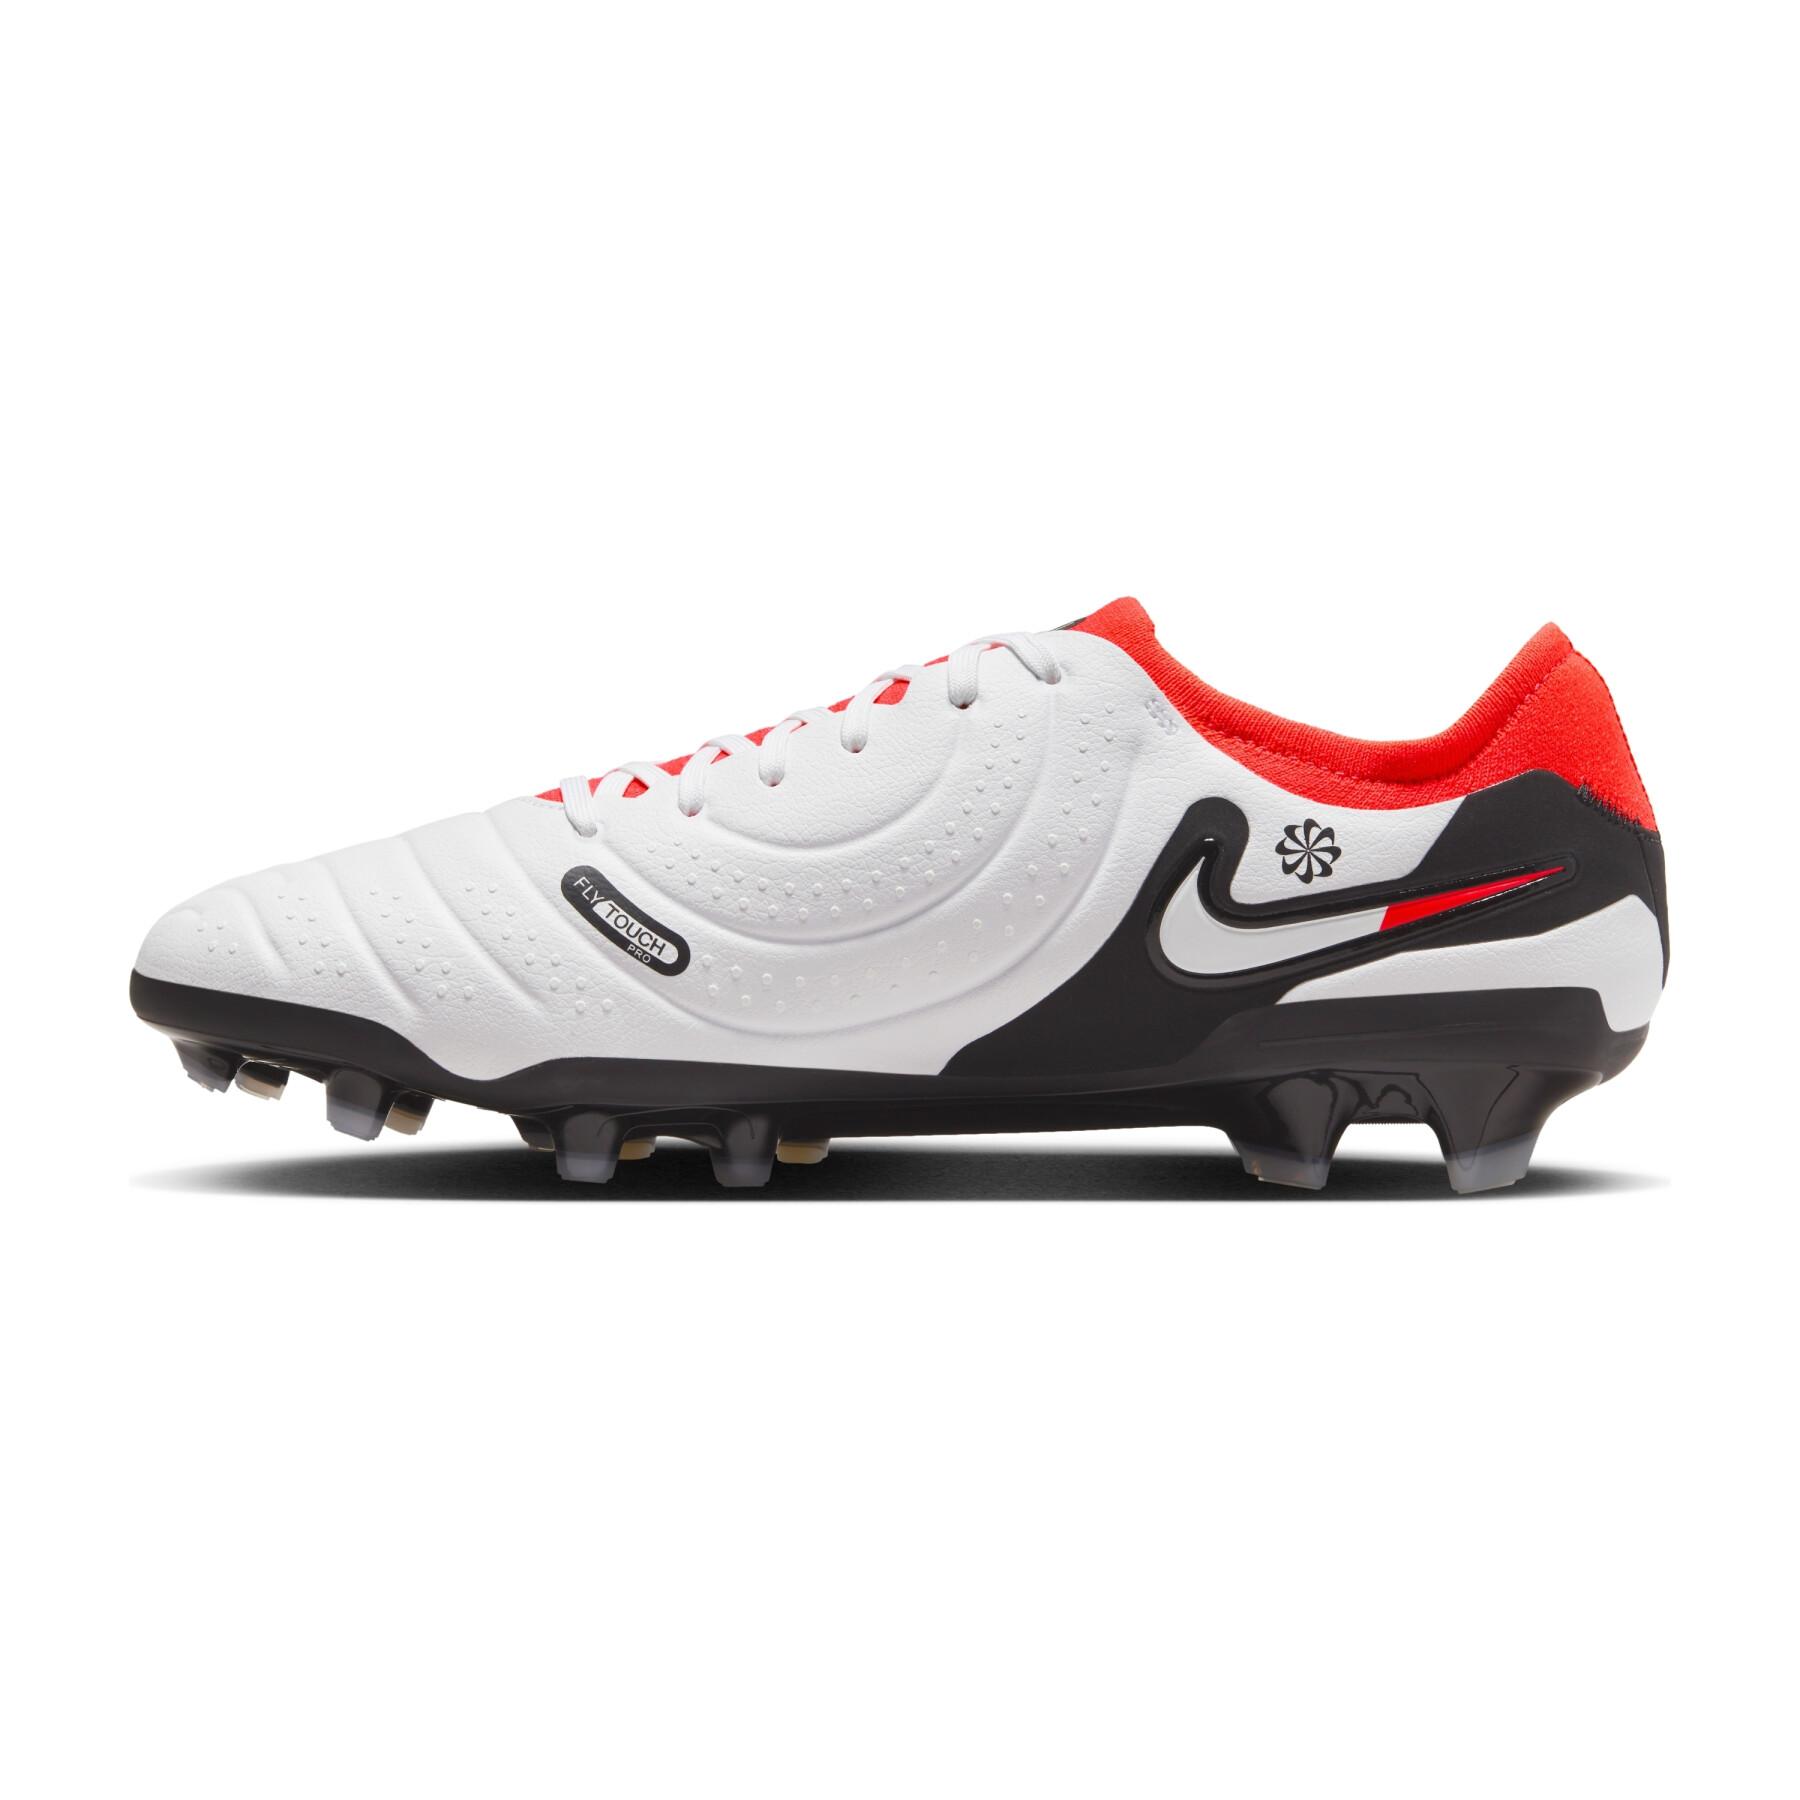 Chaussures de football Nike Tiempo Legend 10 Pro FG - Ready Pack